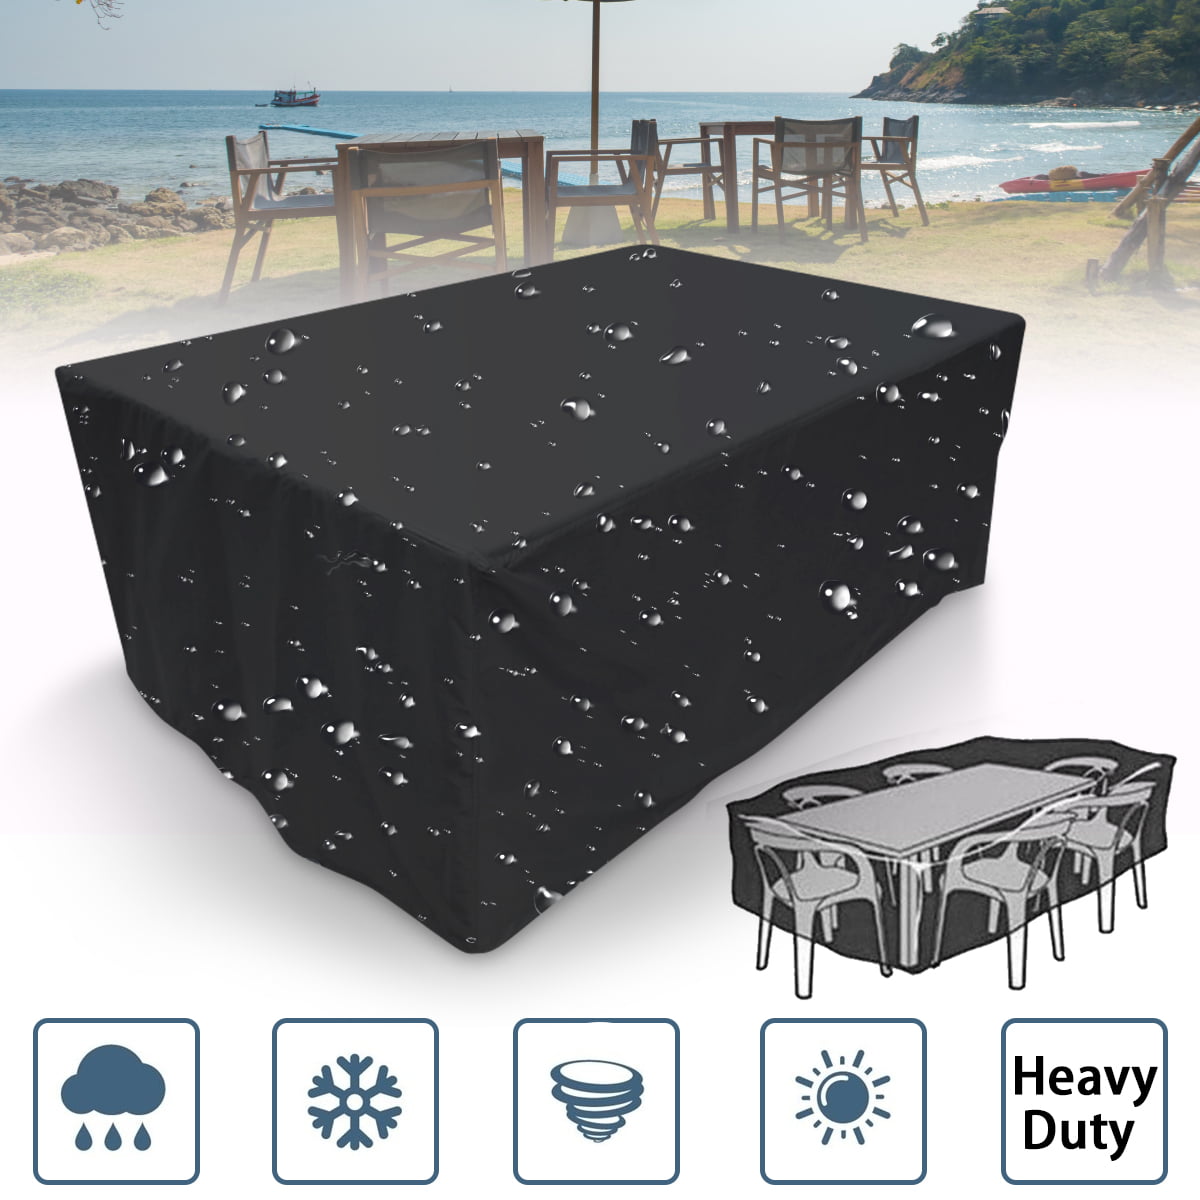 4 Size Outdoor Rectangular Waterproof Furniture Cover Washable